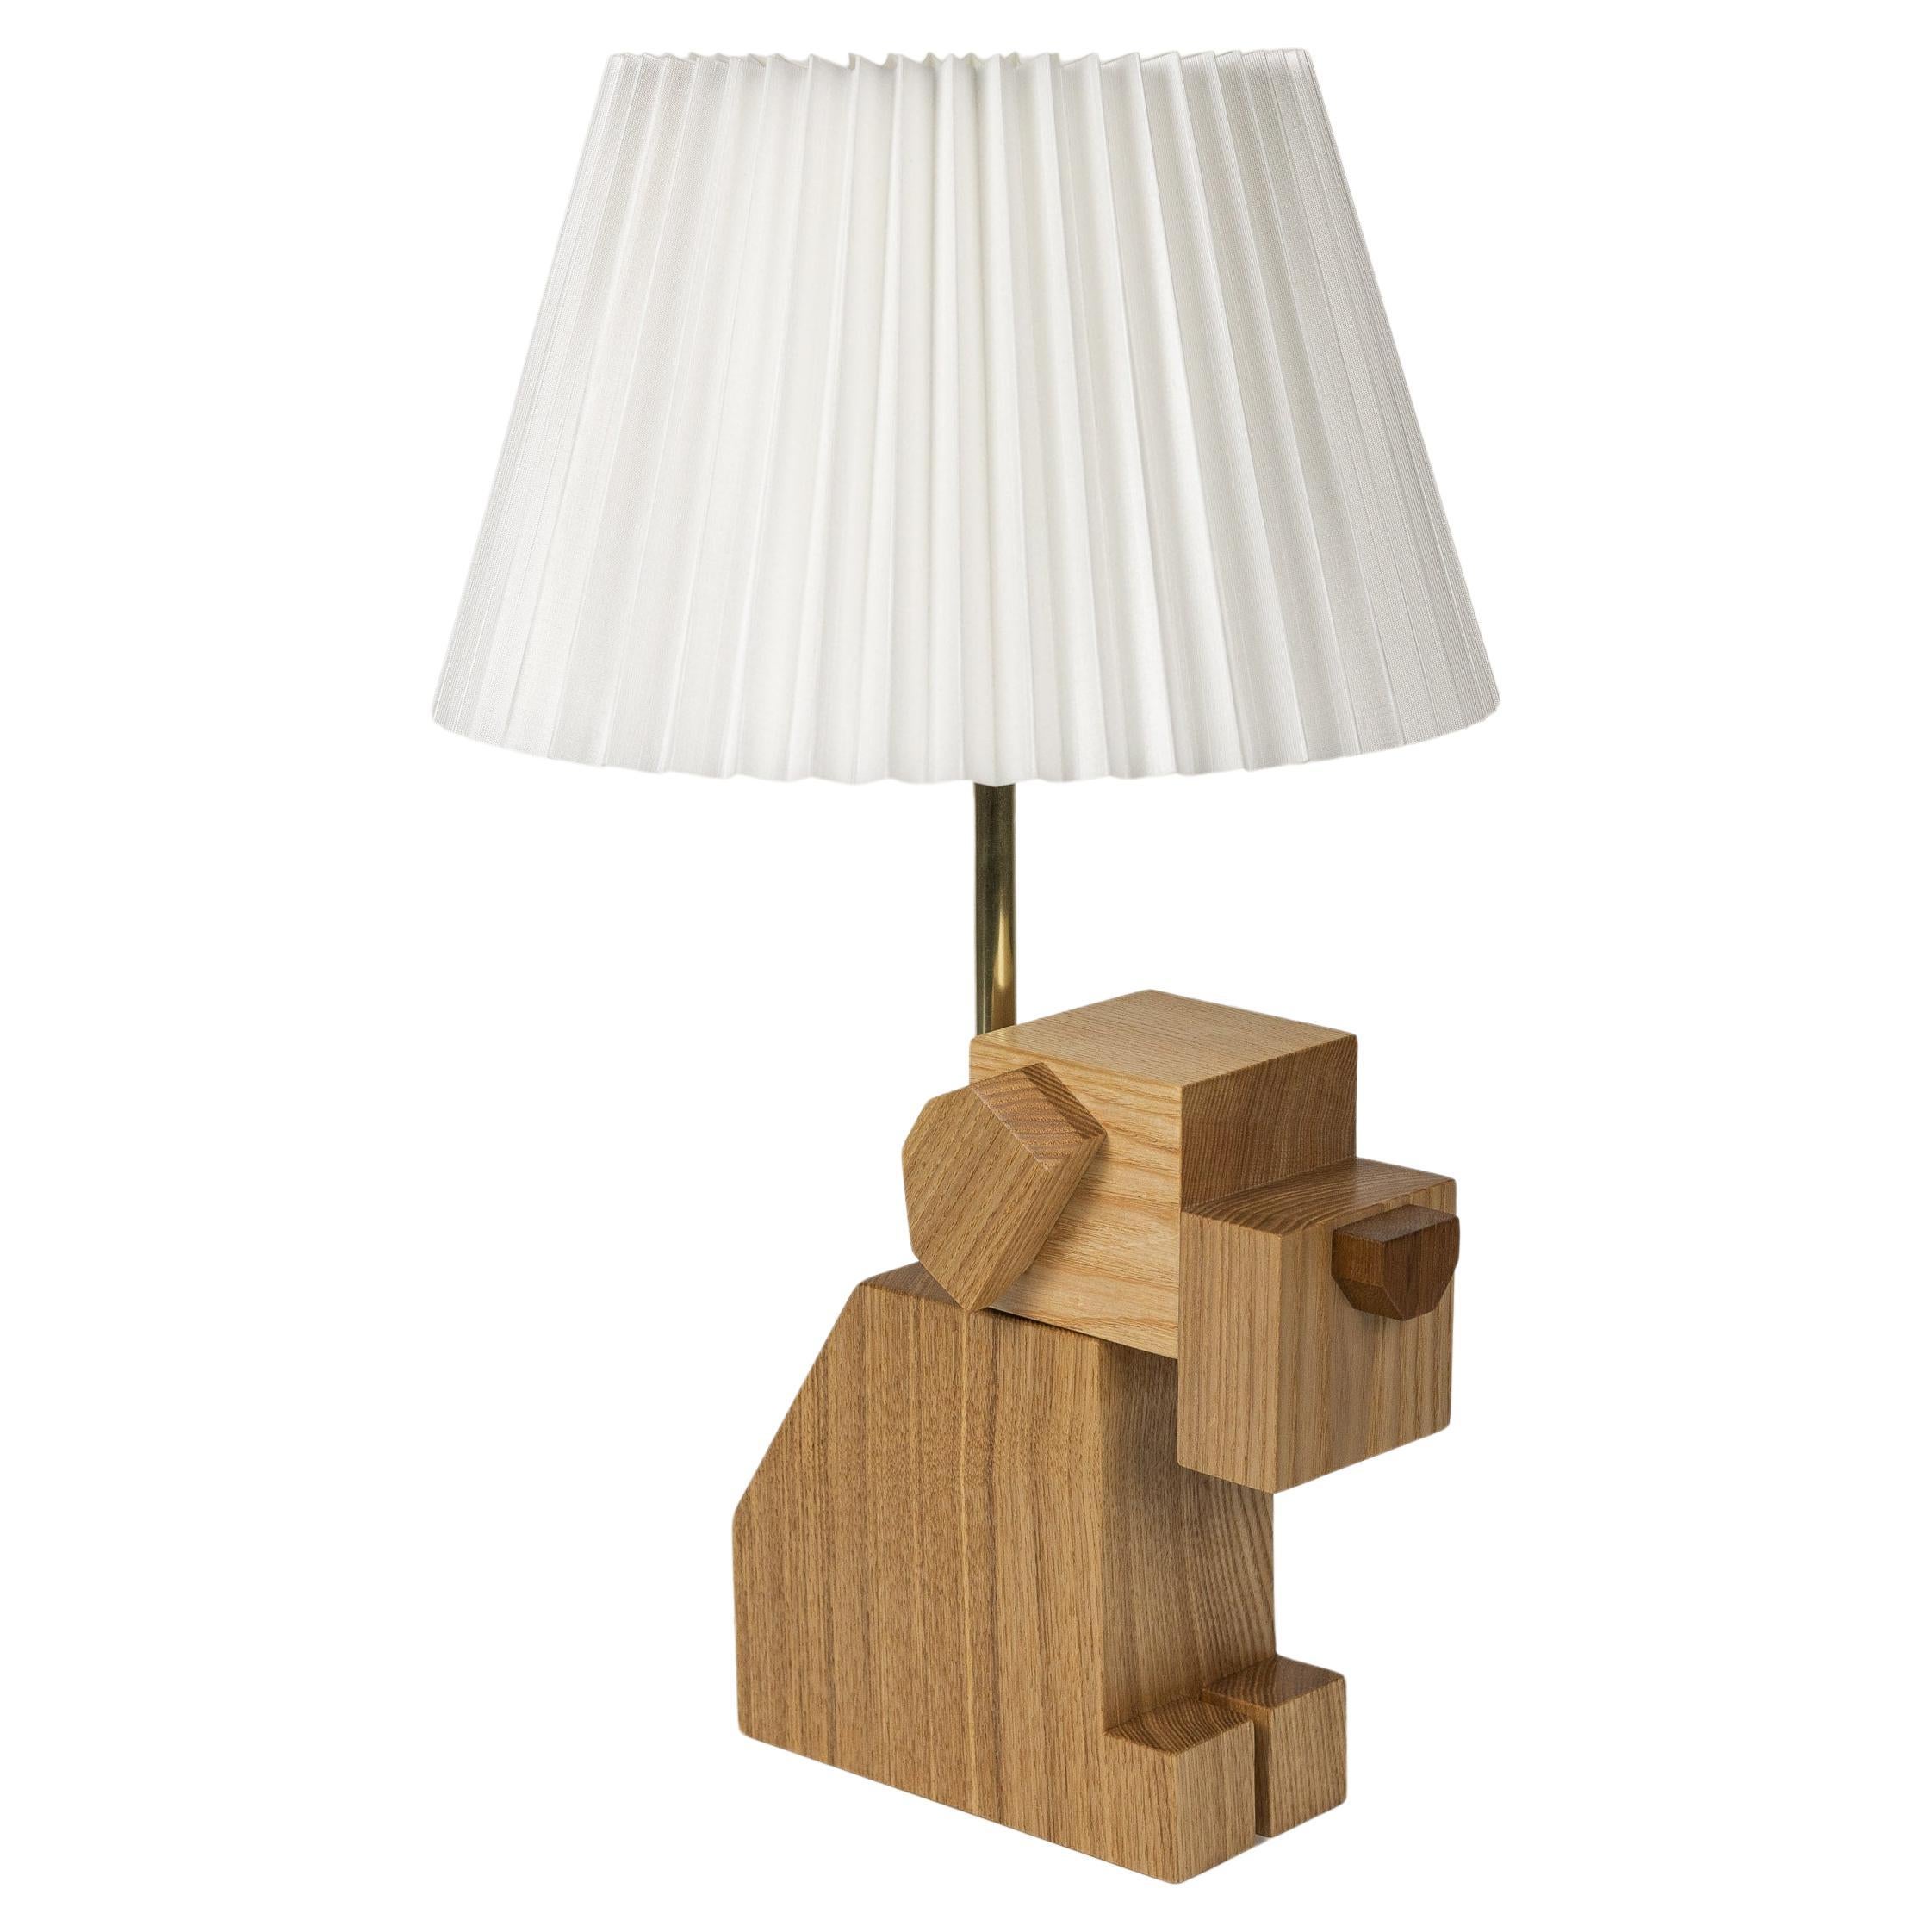 Wood DOGGY Table Lamp with White Fabric Shade, hand-crafted, hardwood For Sale